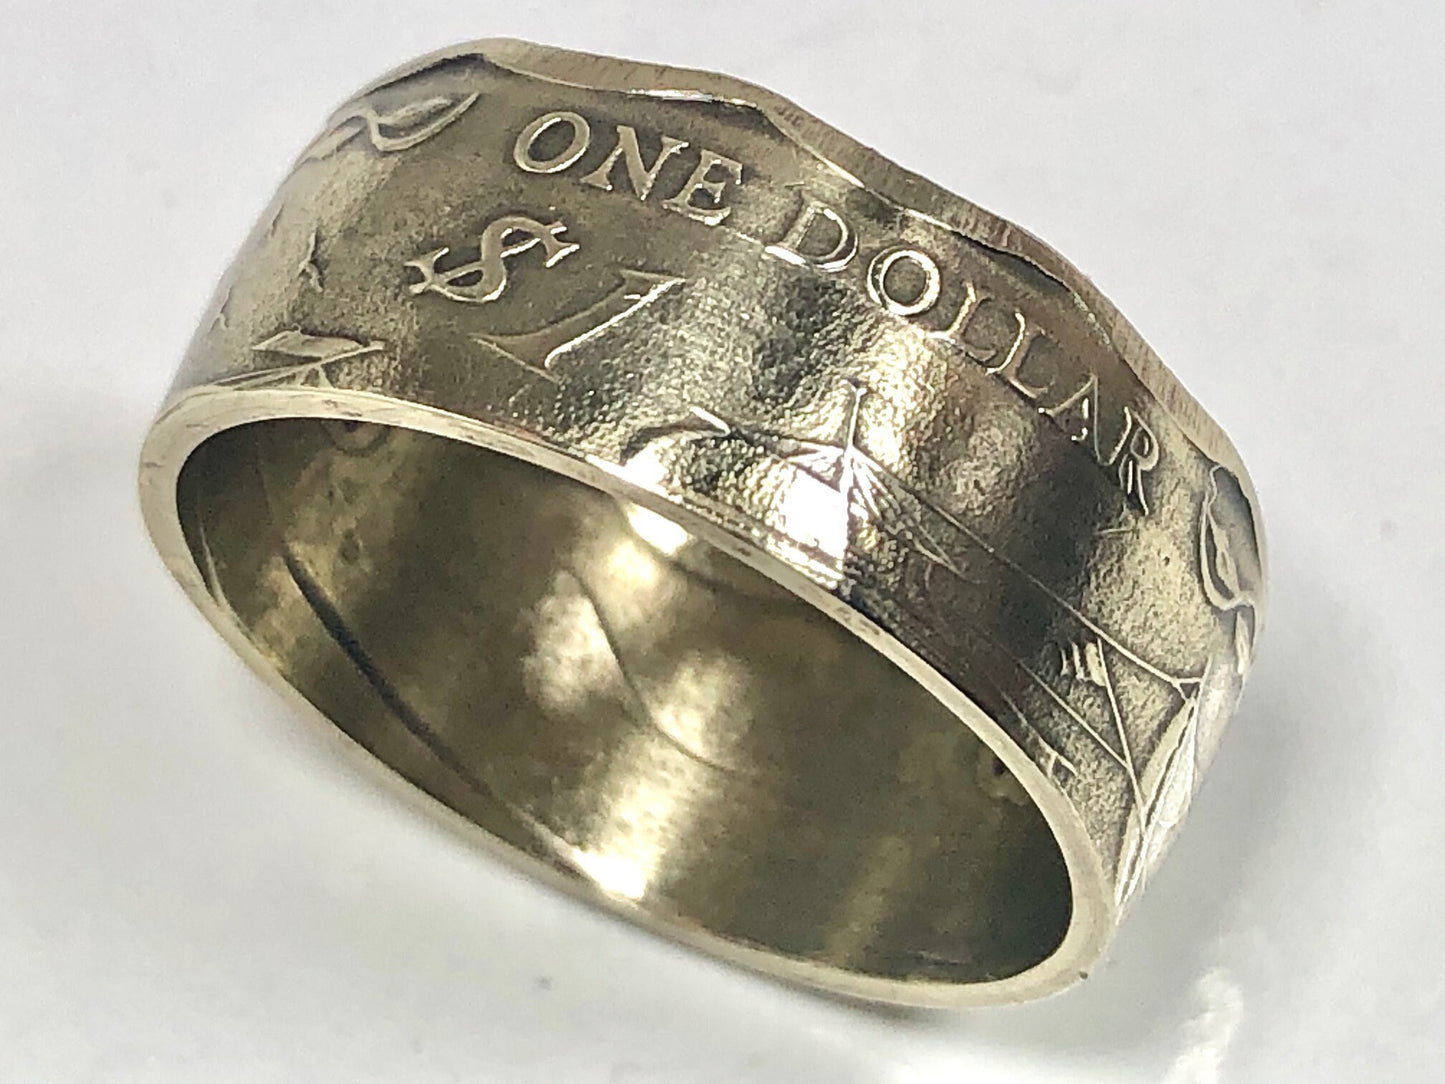 Belize Ring One Dollar Coin Ring Handmade Personal Jewelry Ring Gift For Friend Coin Ring Gift For Him Her World Coin Collector